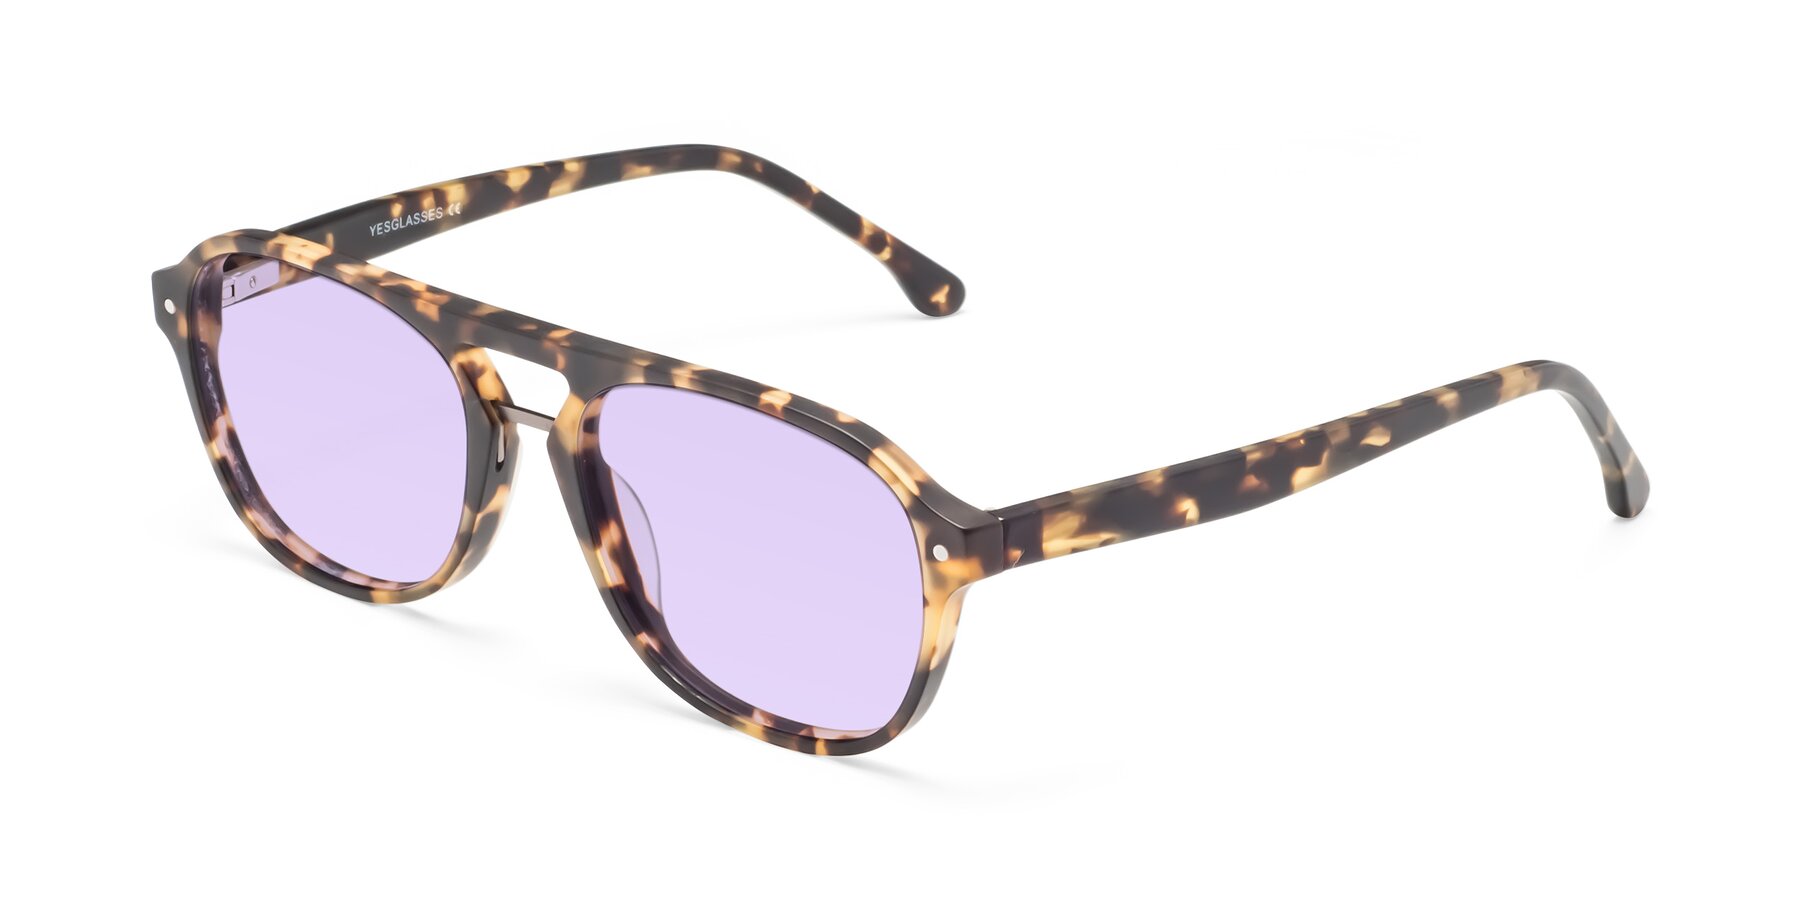 Angle of 17416 in Matte Tortoise with Light Purple Tinted Lenses